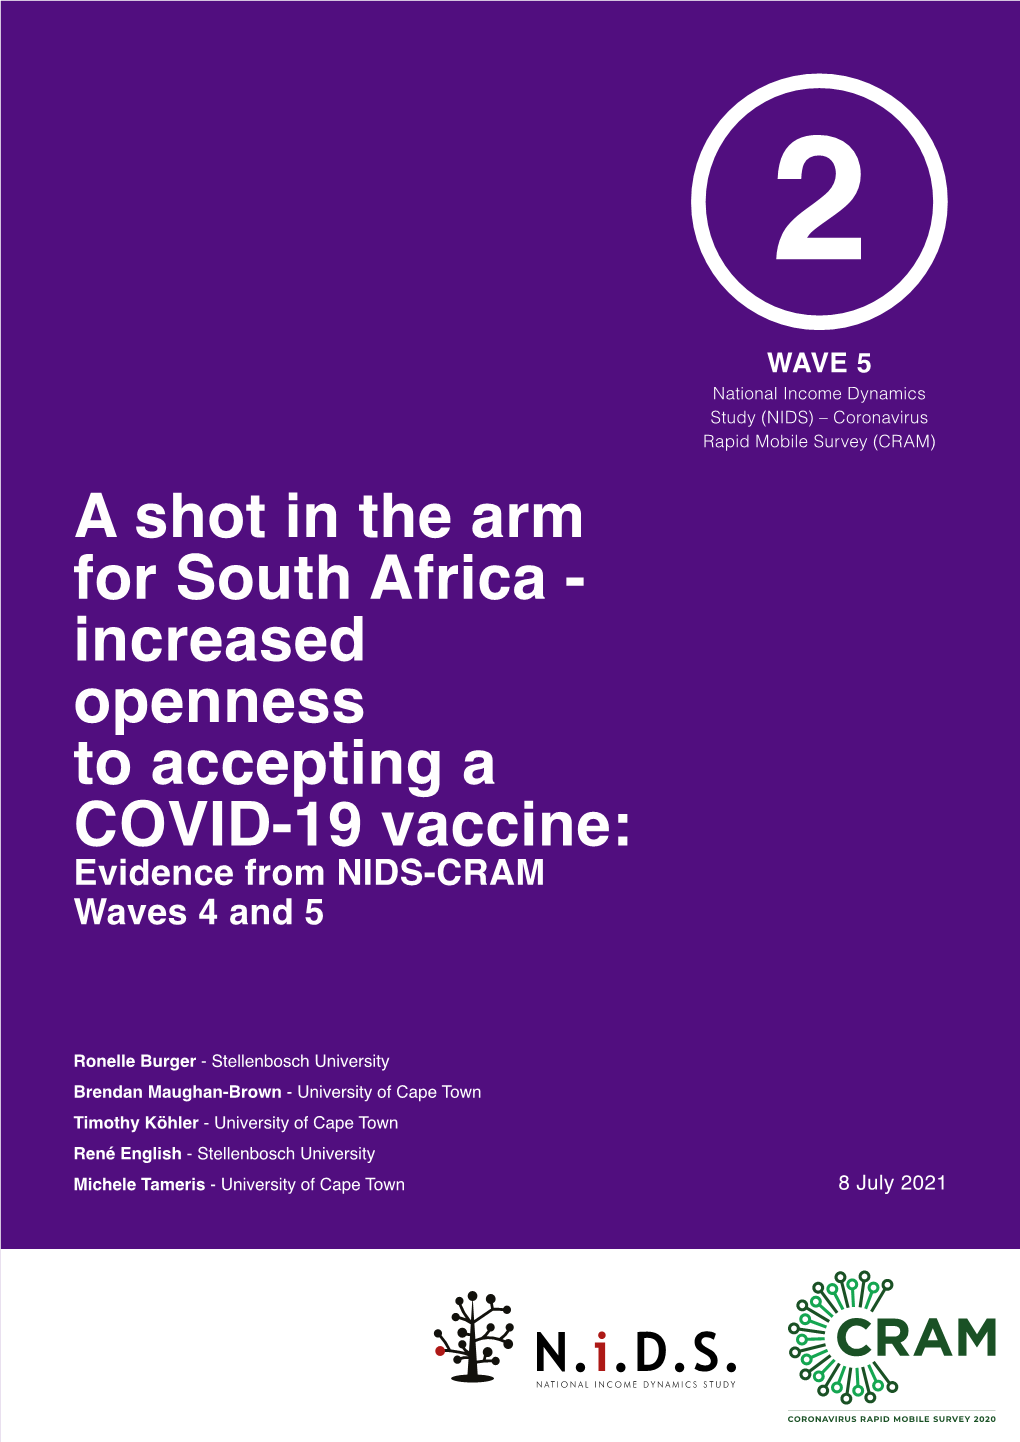 Increased Openness to Accepting a COVID-19 Vaccine: Evidence from NIDS-CRAM Waves 4 and 5